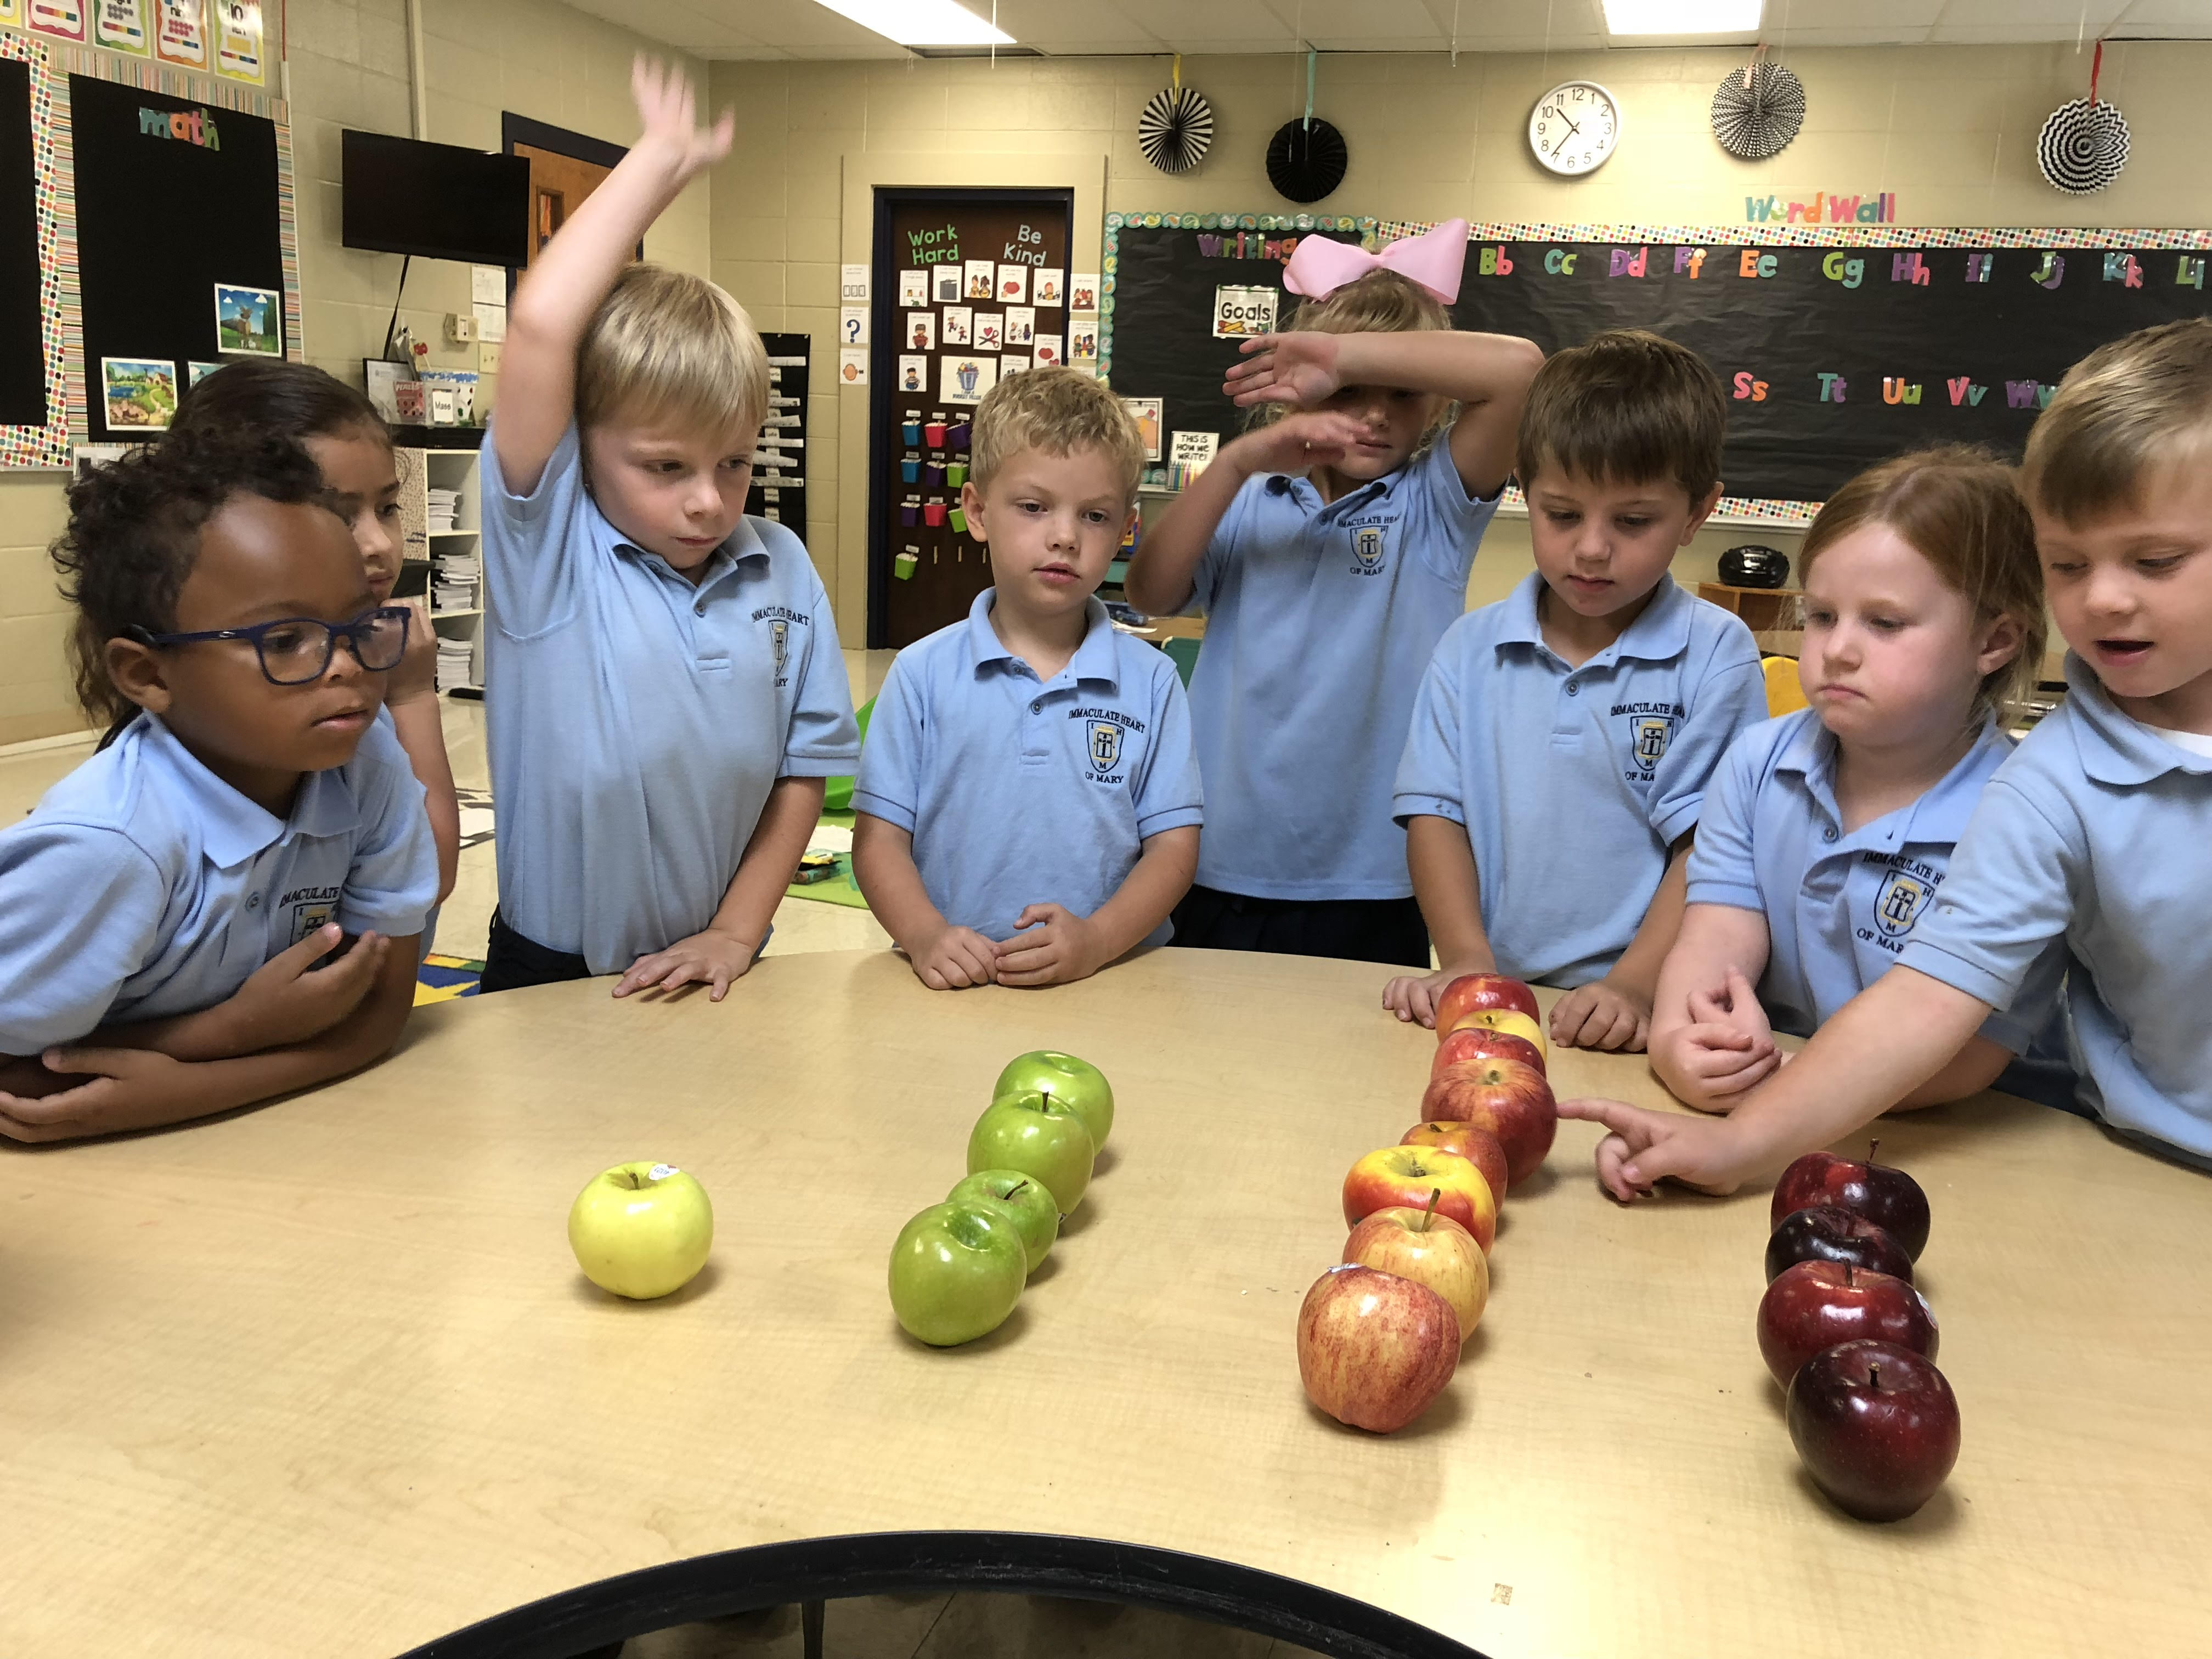 A group of students counting with apples